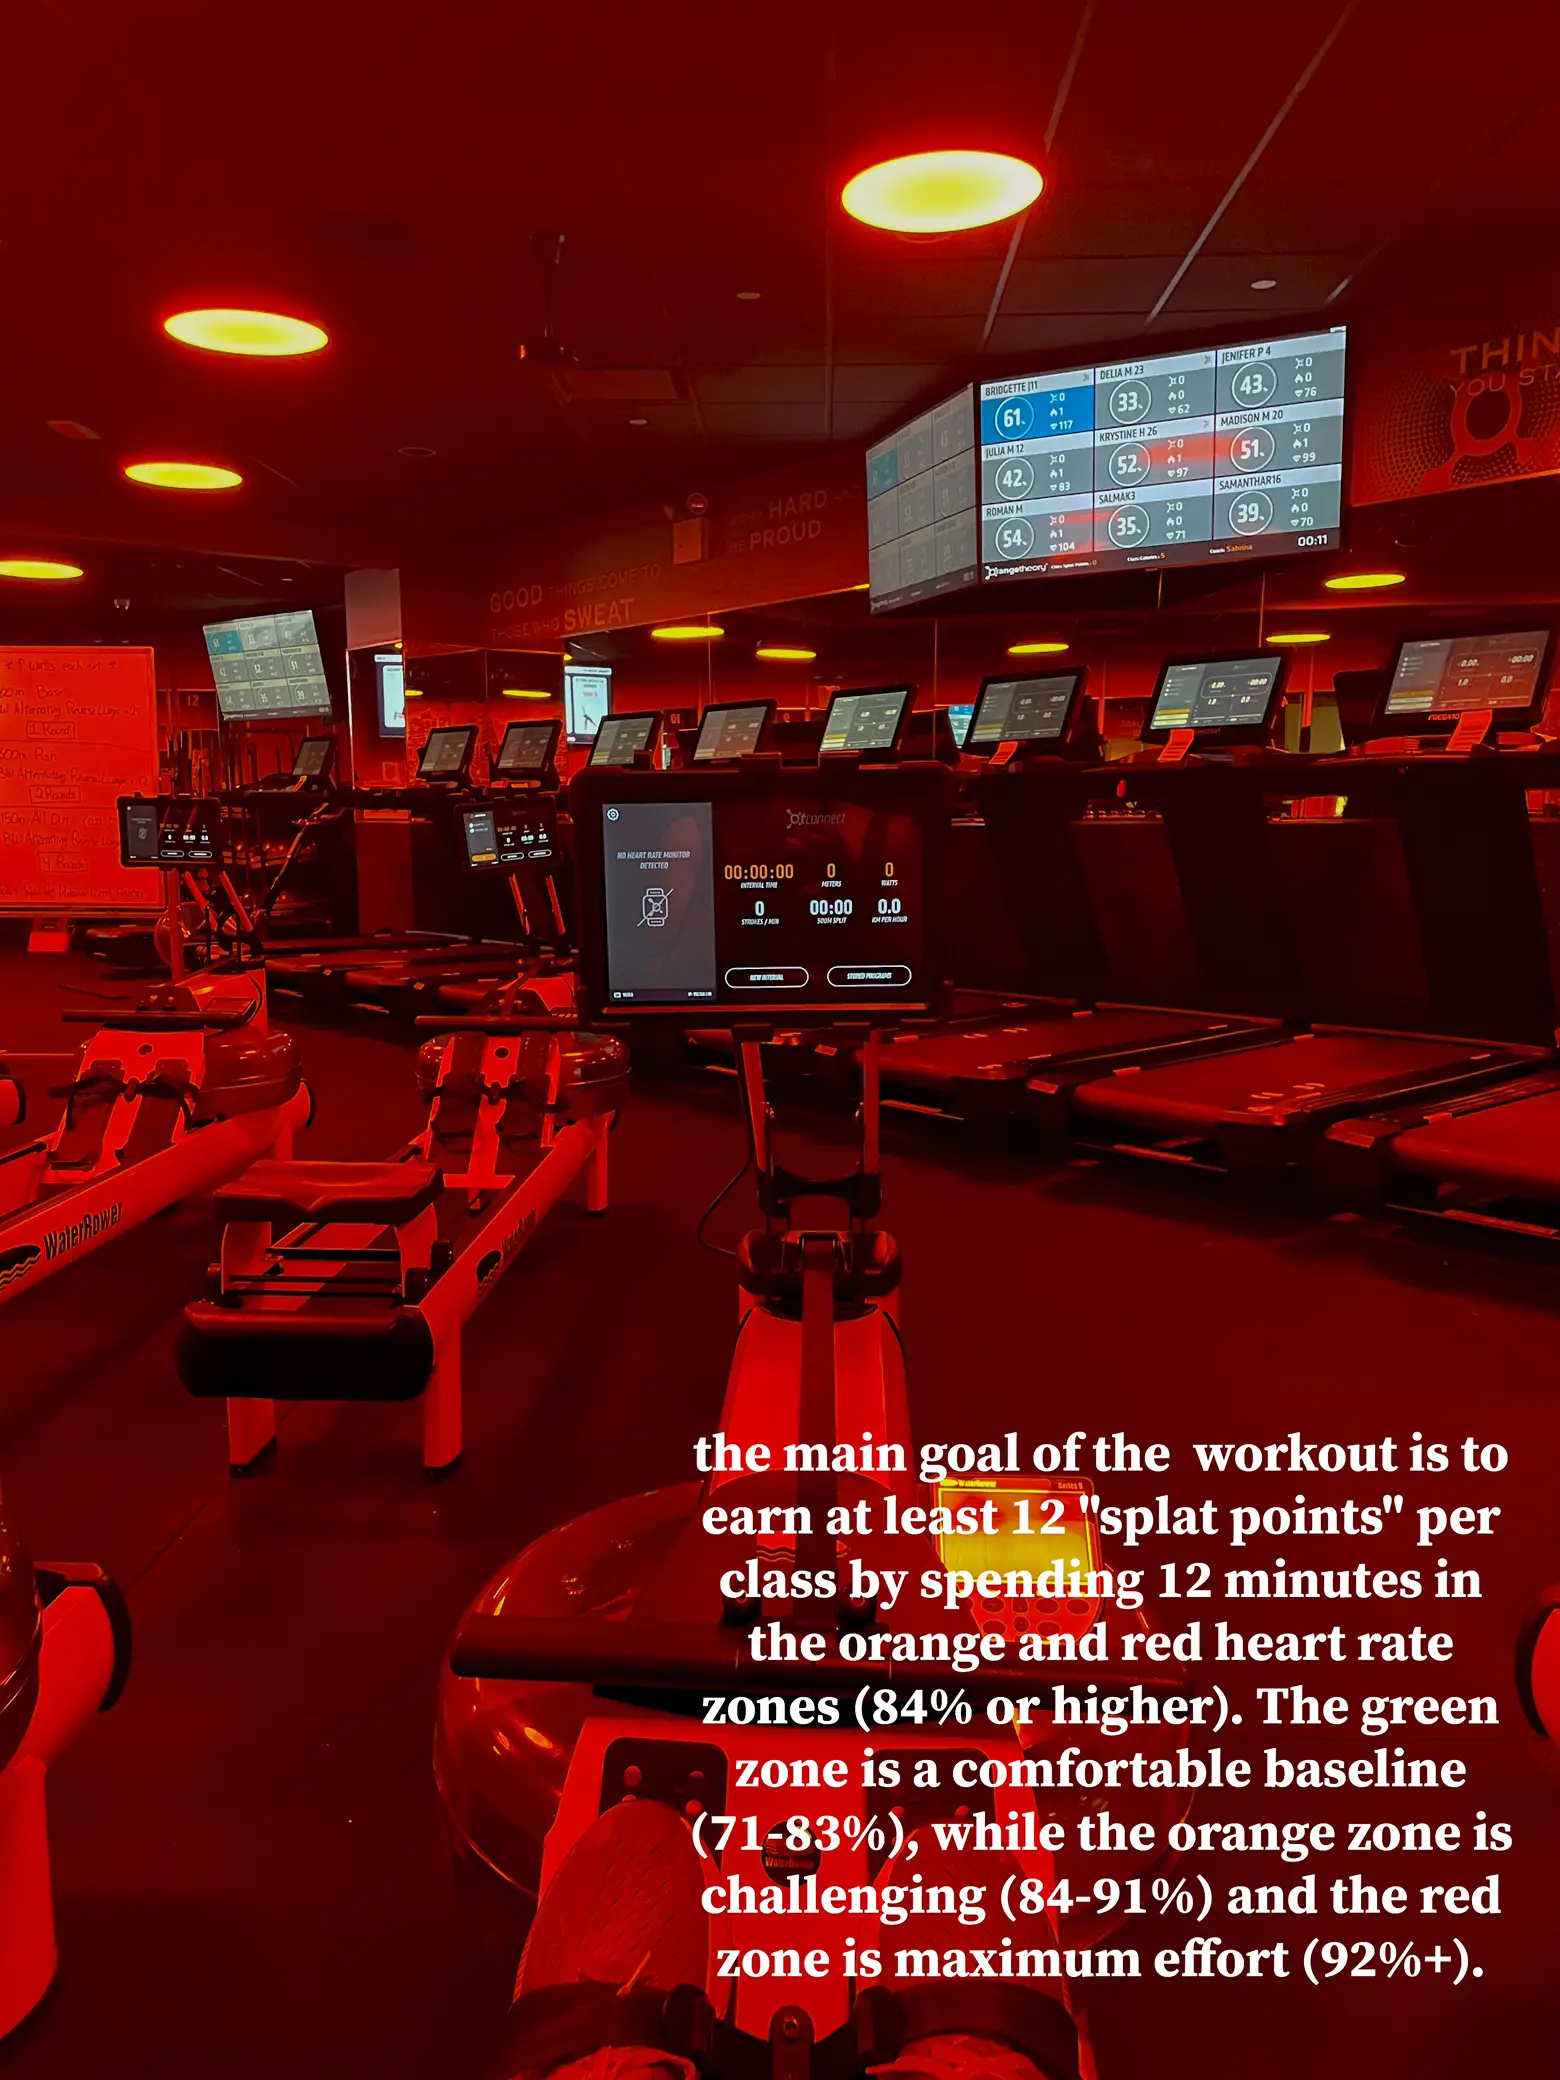 Come with me to Orangetheory!, Gallery posted by Kingkrystine